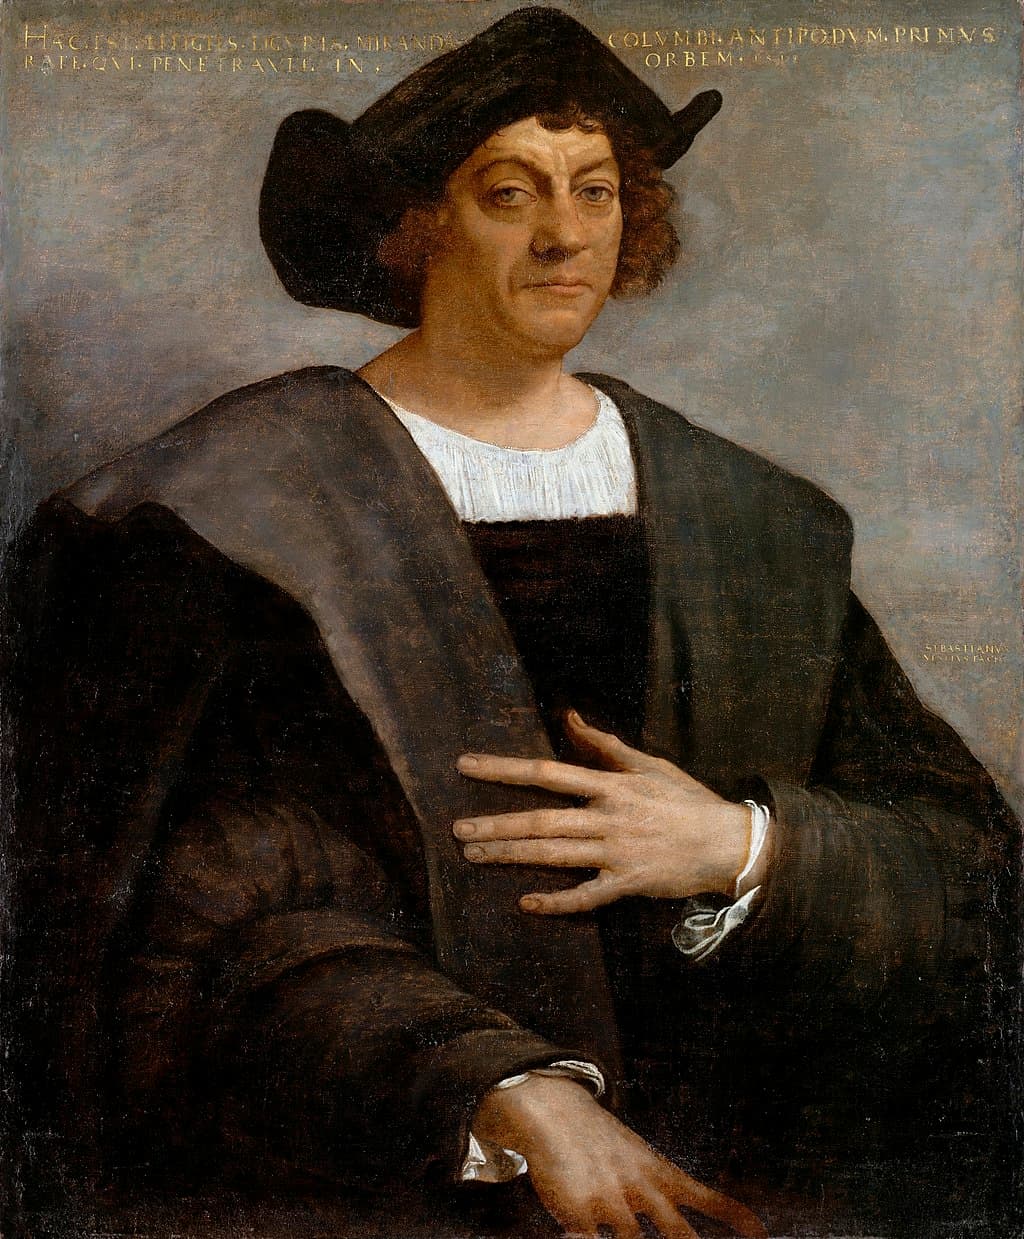 Portrait of a Man, Said to be Christopher Columbus, 1519